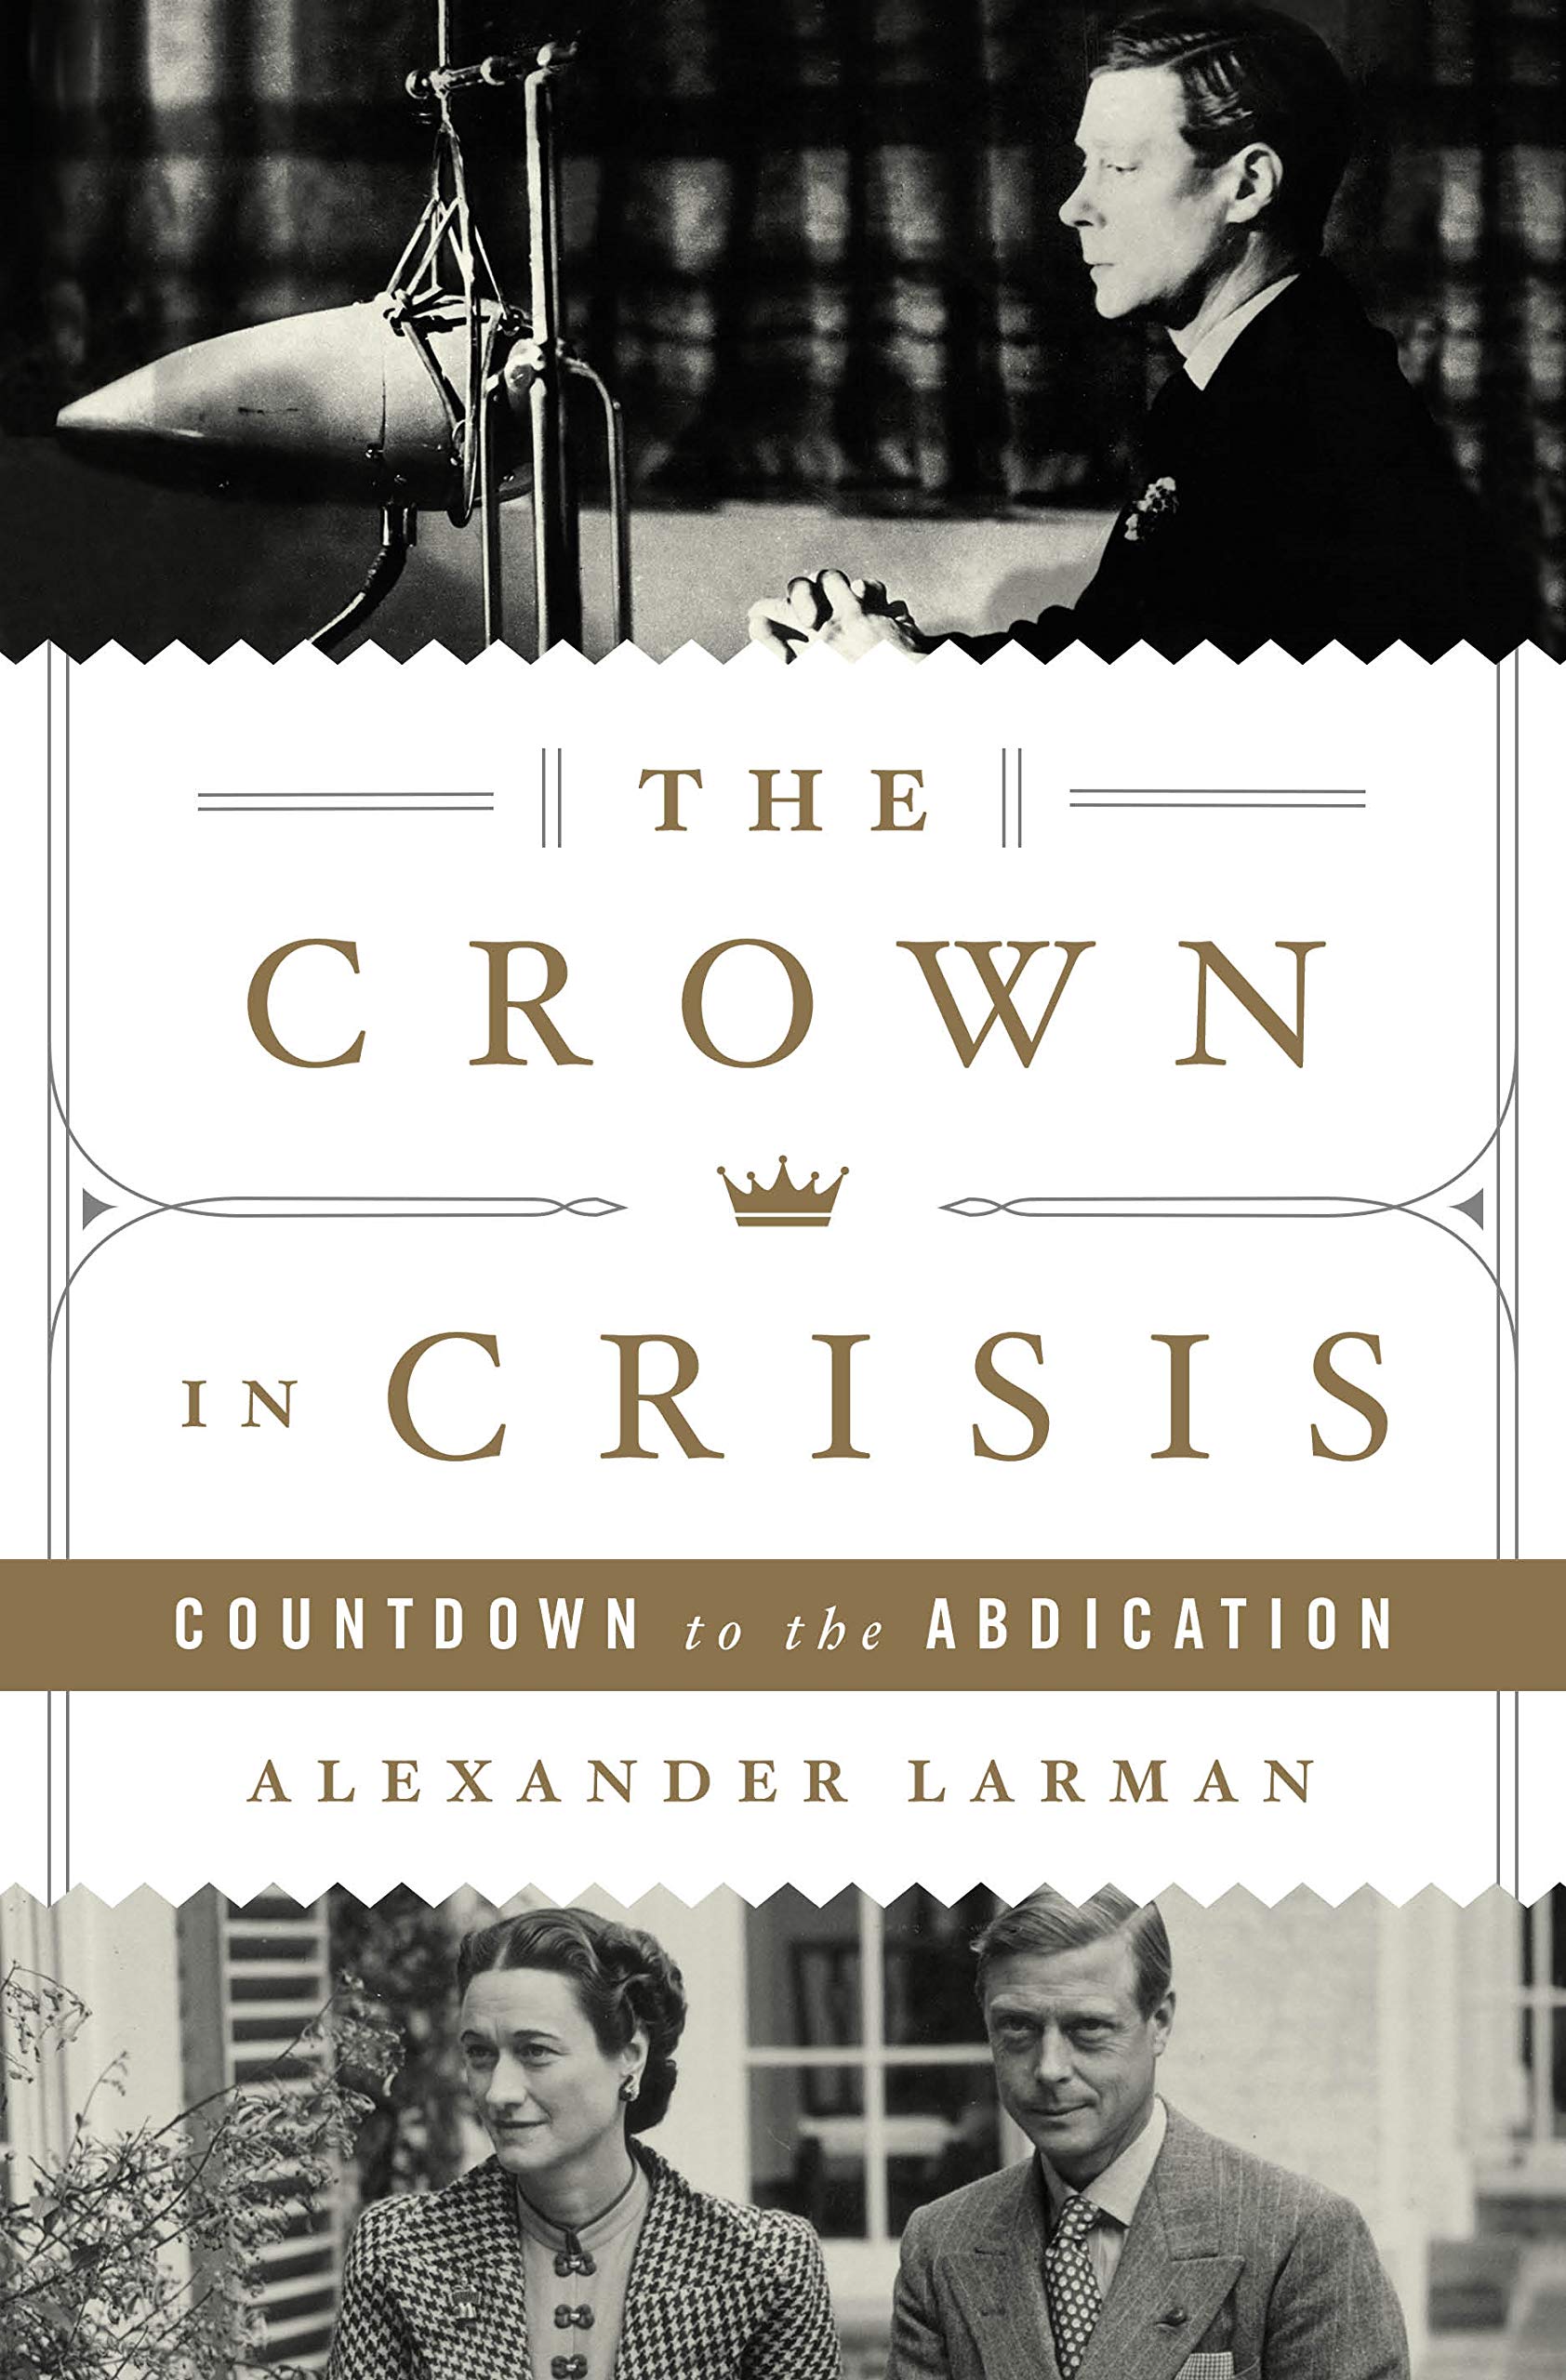 Image for "The Crown in Crisis"